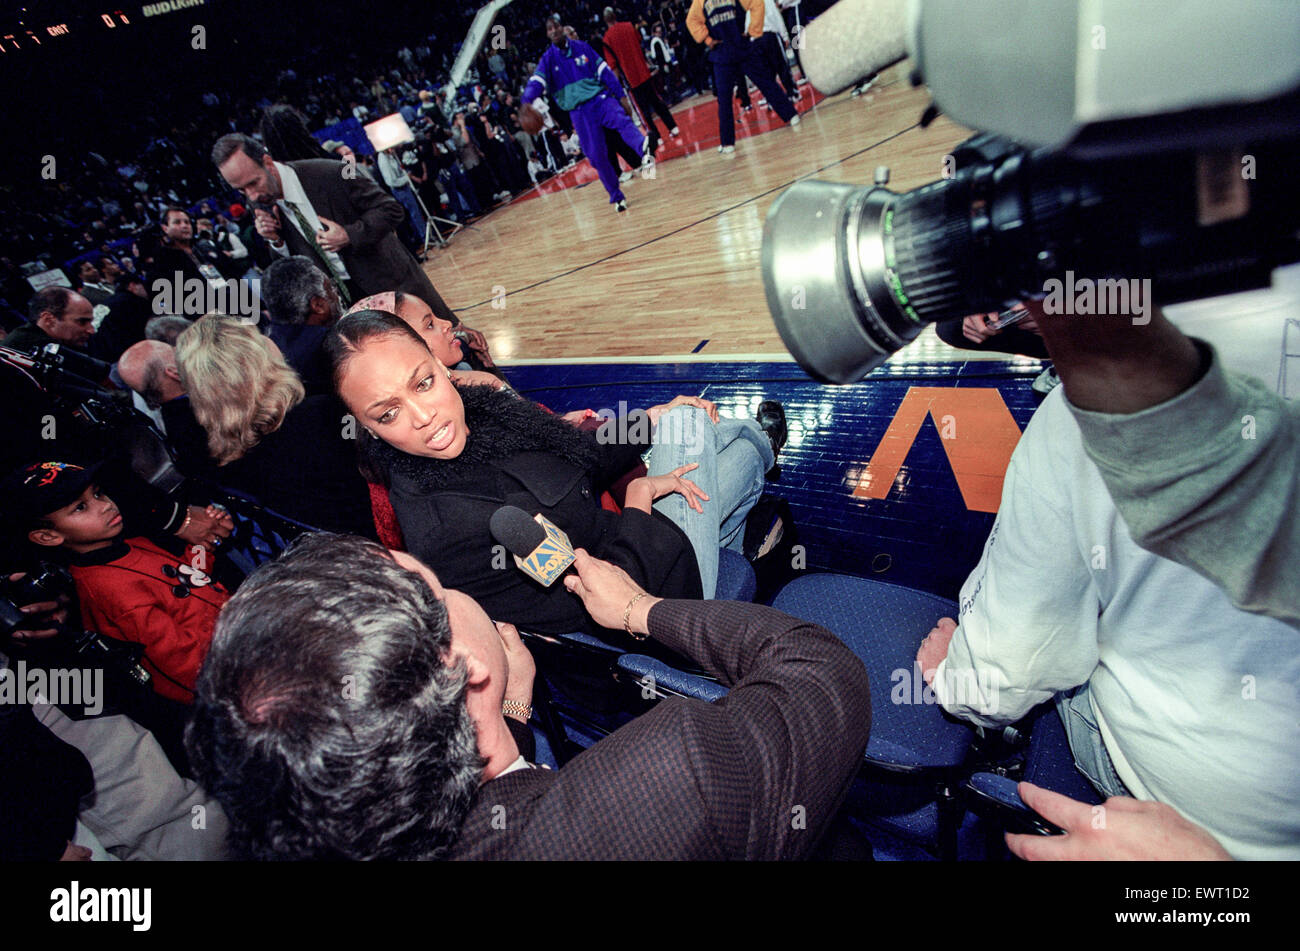 OAKLAND, CA – FEBRUARY 13: Tyra Banks at the NBA All-Star Game held in Oakland, California on February 13, 2000. Stock Photo